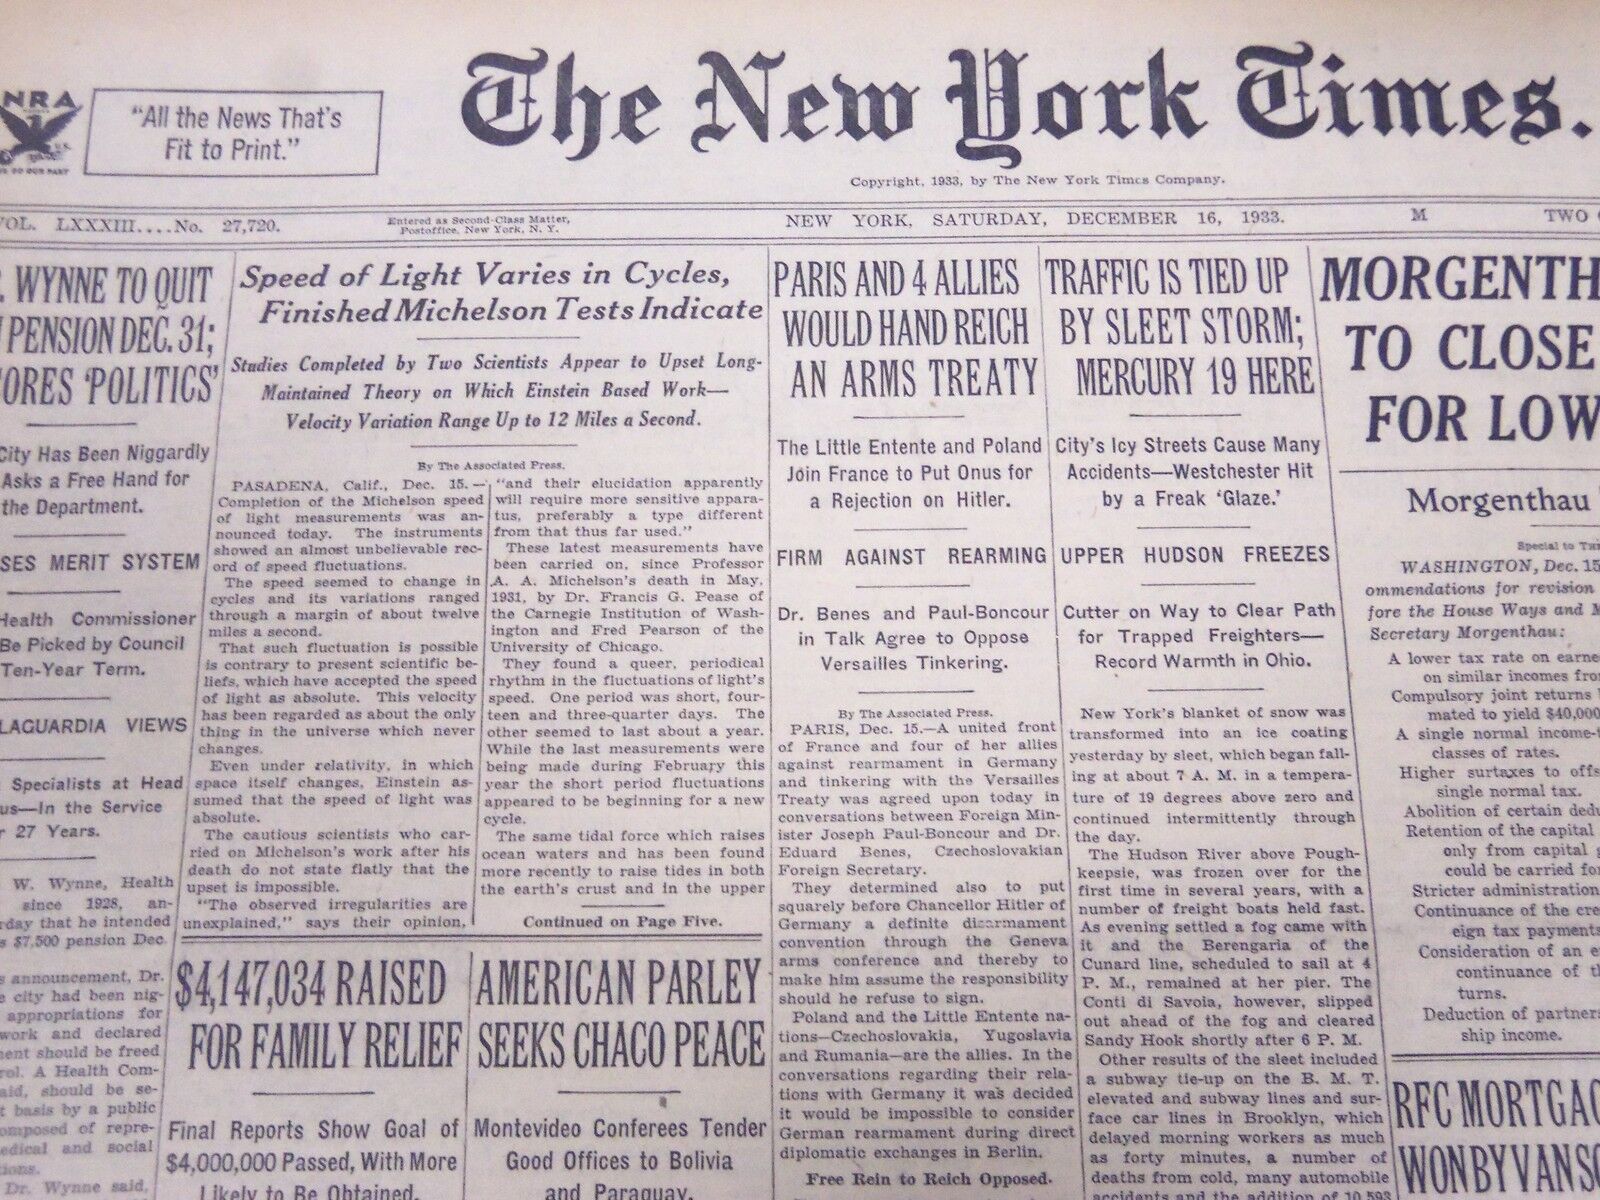 1933 DECEMBER 16 NEW YORK TIMES - SPEED OF LIGHT VARIES IN CYCLES - NT 5272